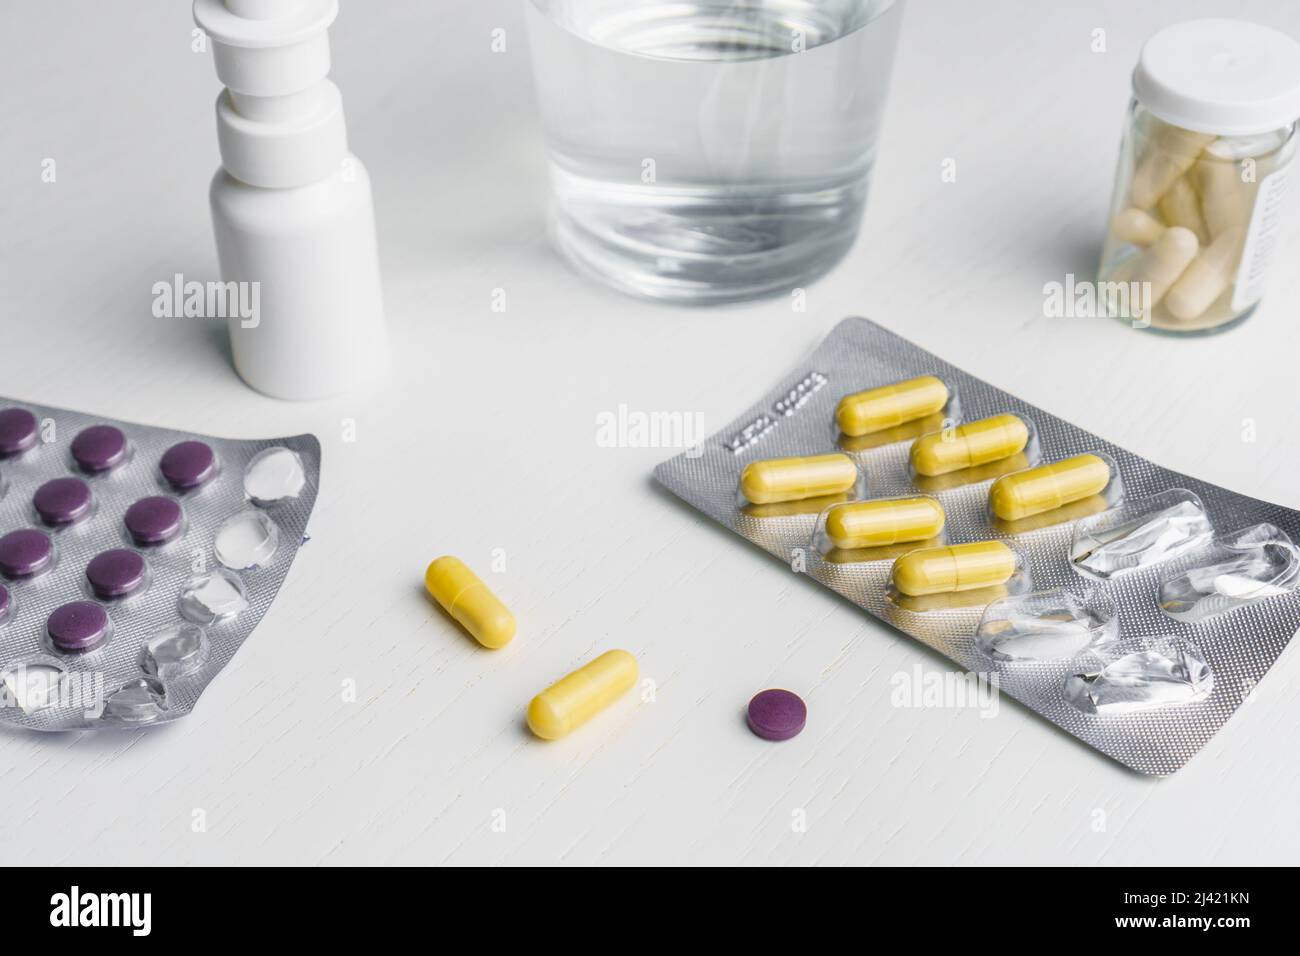 Glass of water, spray for nose, pills in blister and used napkins on table. Flu treatment concept Stock Photo